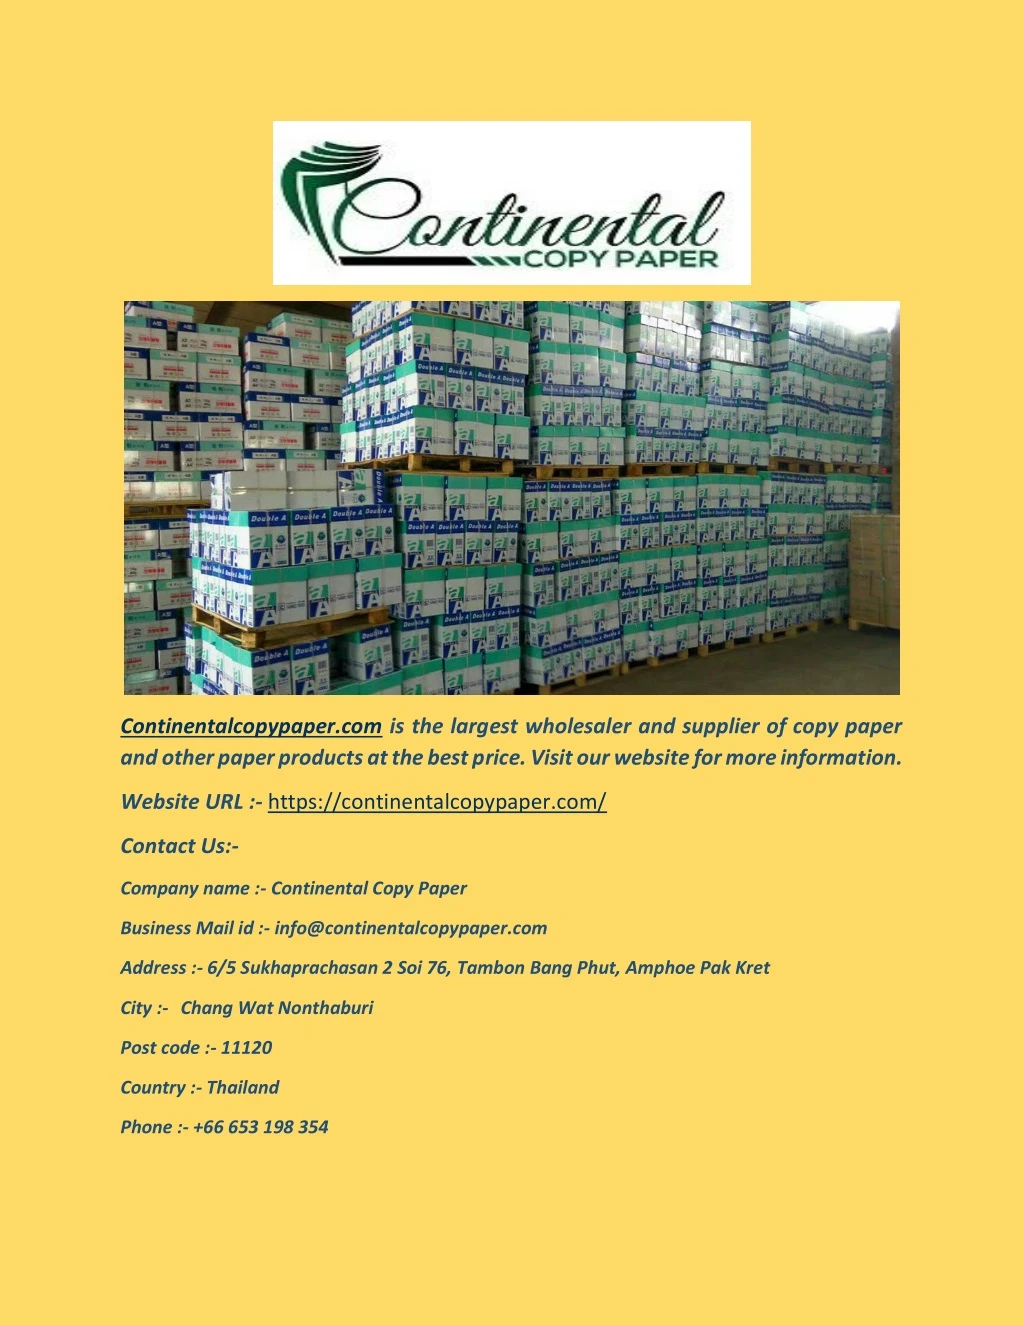 continentalcopypaper com is the largest